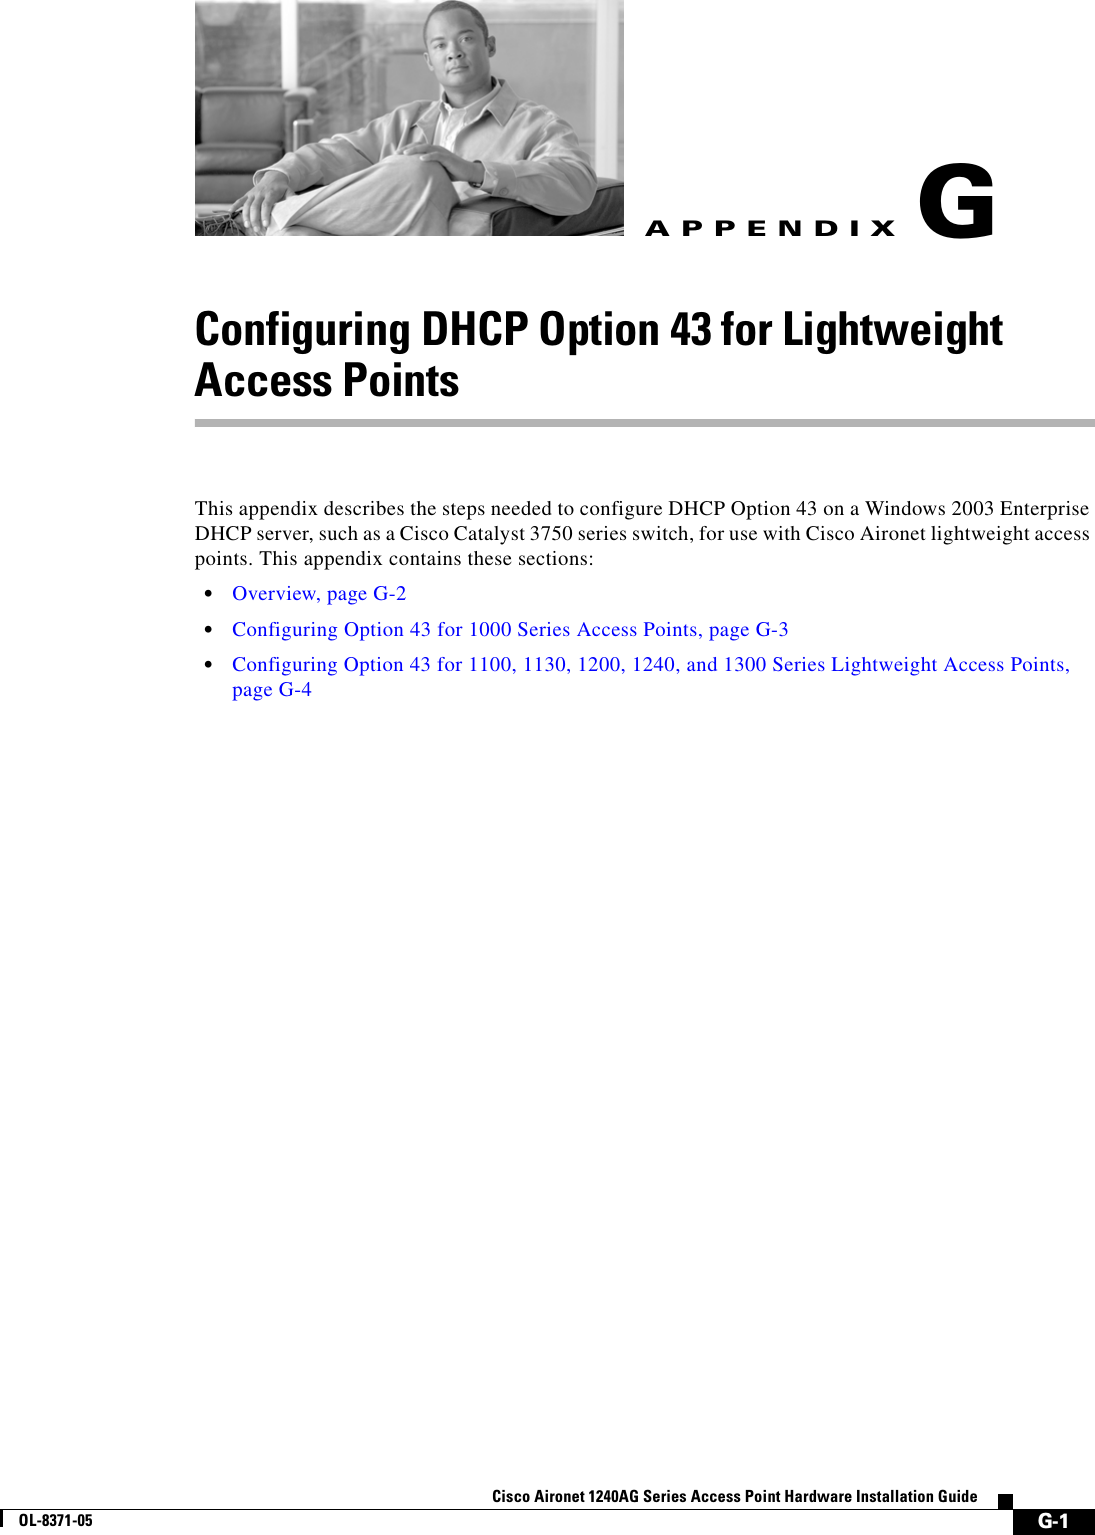  G-1Cisco Aironet 1240AG Series Access Point Hardware Installation GuideOL-8371-05APPENDIXGConfiguring DHCP Option 43 for Lightweight Access PointsThis appendix describes the steps needed to configure DHCP Option 43 on a Windows 2003 Enterprise DHCP server, such as a Cisco Catalyst 3750 series switch, for use with Cisco Aironet lightweight access points. This appendix contains these sections:•Overview, page G-2•Configuring Option 43 for 1000 Series Access Points, page G-3•Configuring Option 43 for 1100, 1130, 1200, 1240, and 1300 Series Lightweight Access Points, page G-4